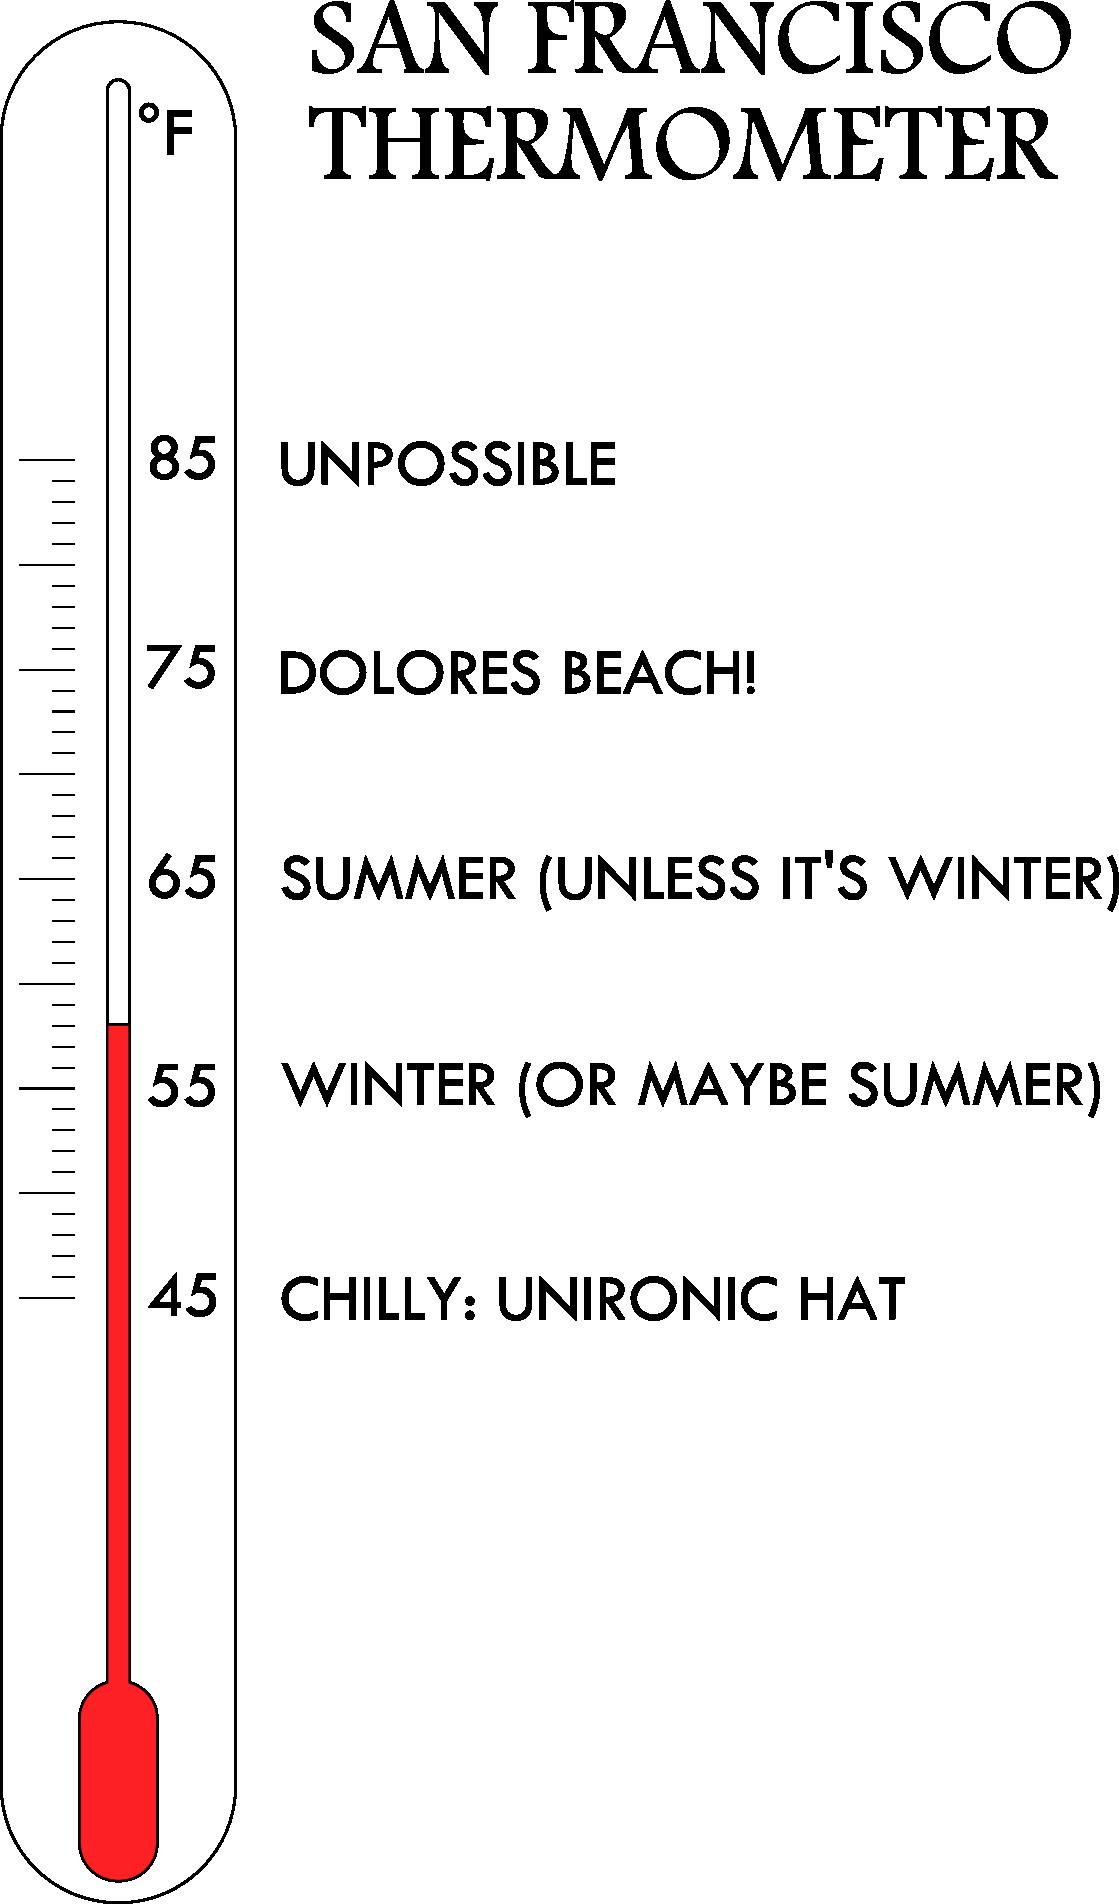 A thermometer with the markings 45:CHILLY UNIRONIC HAT 55:WINTER (OR MAYBE SUMMER) 65:SUMMER(OR MAYBE WINTER) 75:DOLORES BEACH 85:UNPOSSIBLE